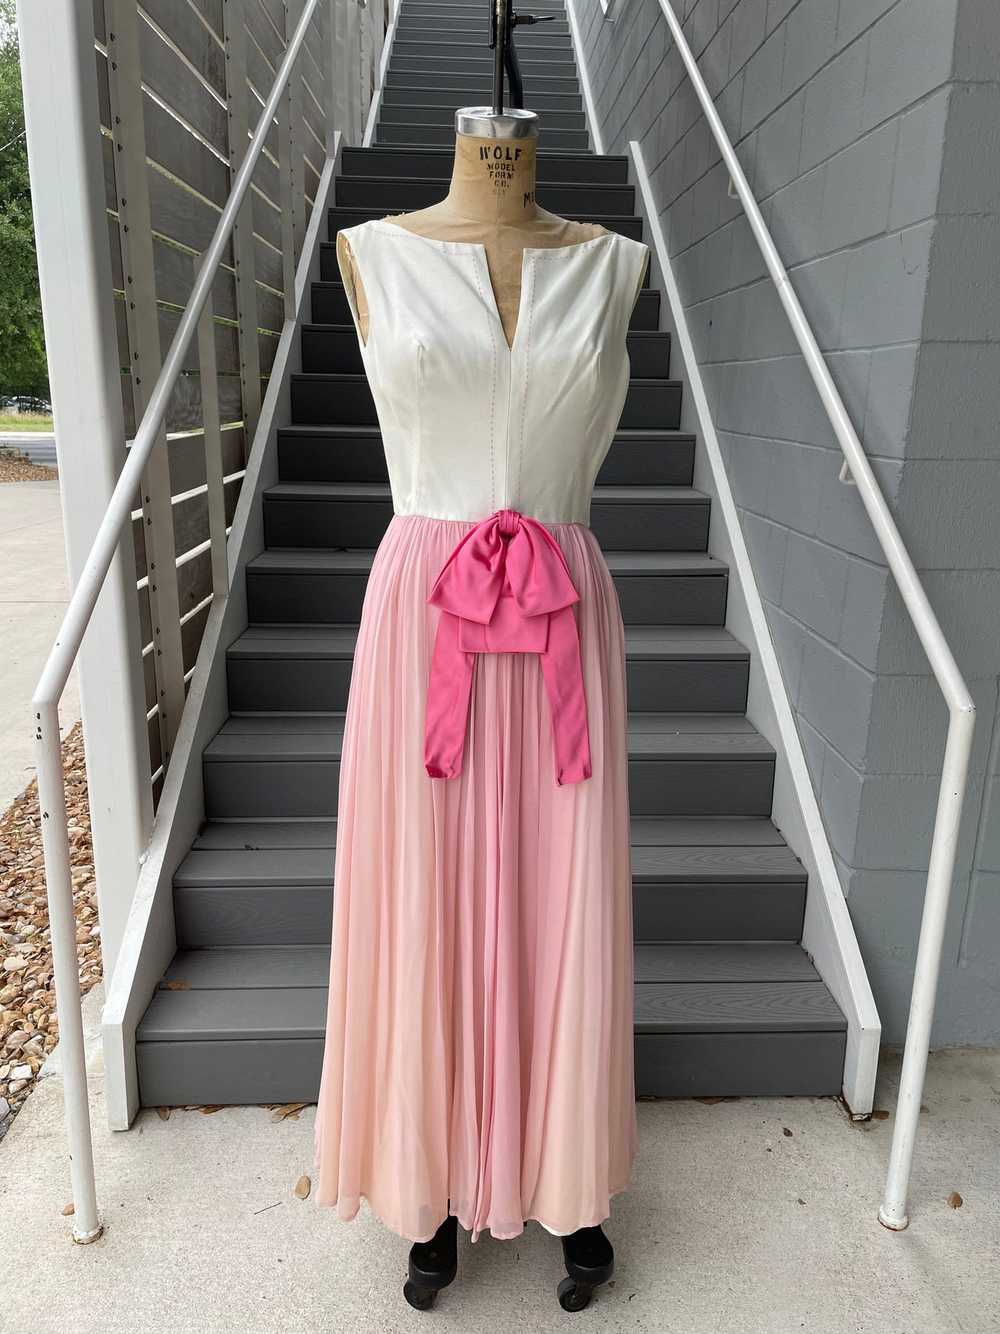 1960's Pink and White Maxi Cocktail Dress - image 2